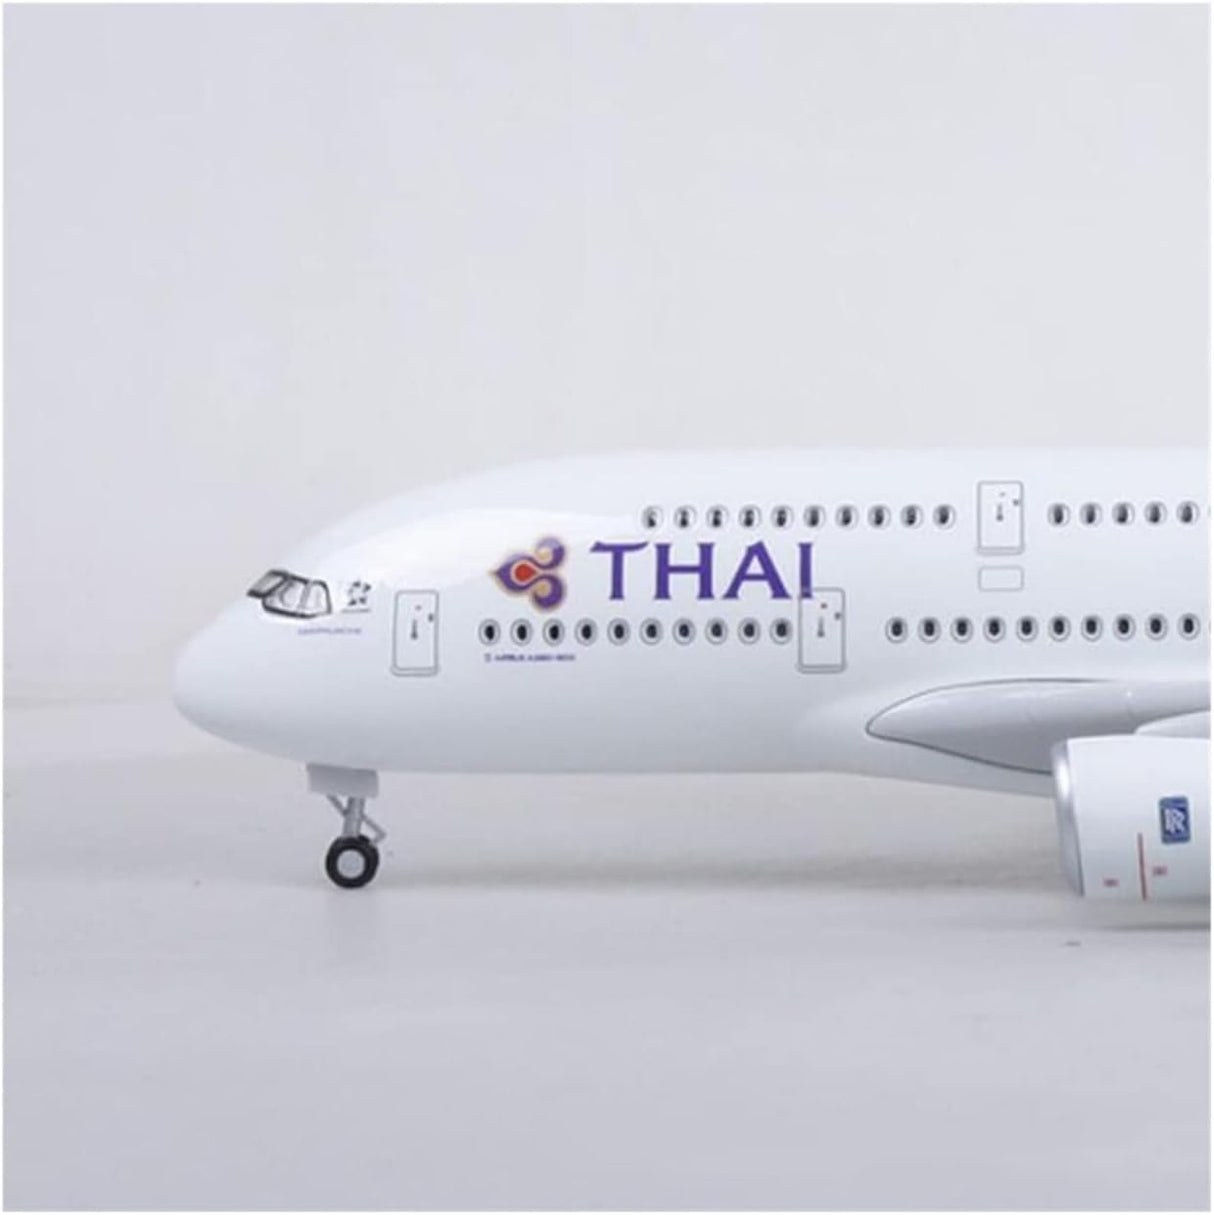 NEW - Airbus A380 THAI AIRWAYS 1/150 LARGE 45CM With Light and Landin gear